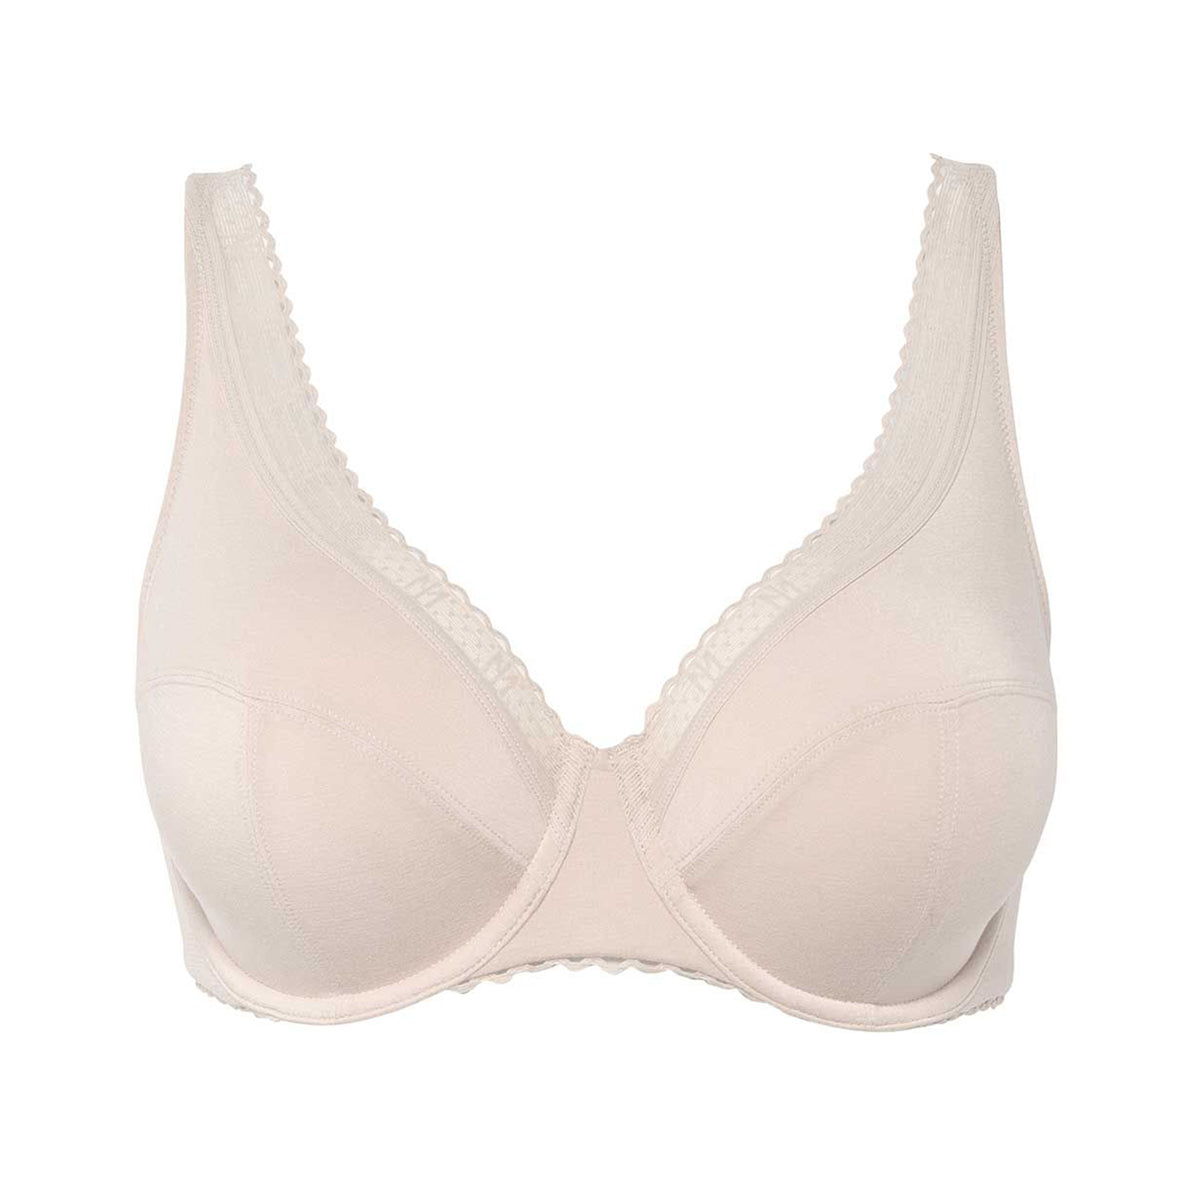 This is the @halston seamless bra set Product: 1483954 2-pack $25.99  #lingerie #bra